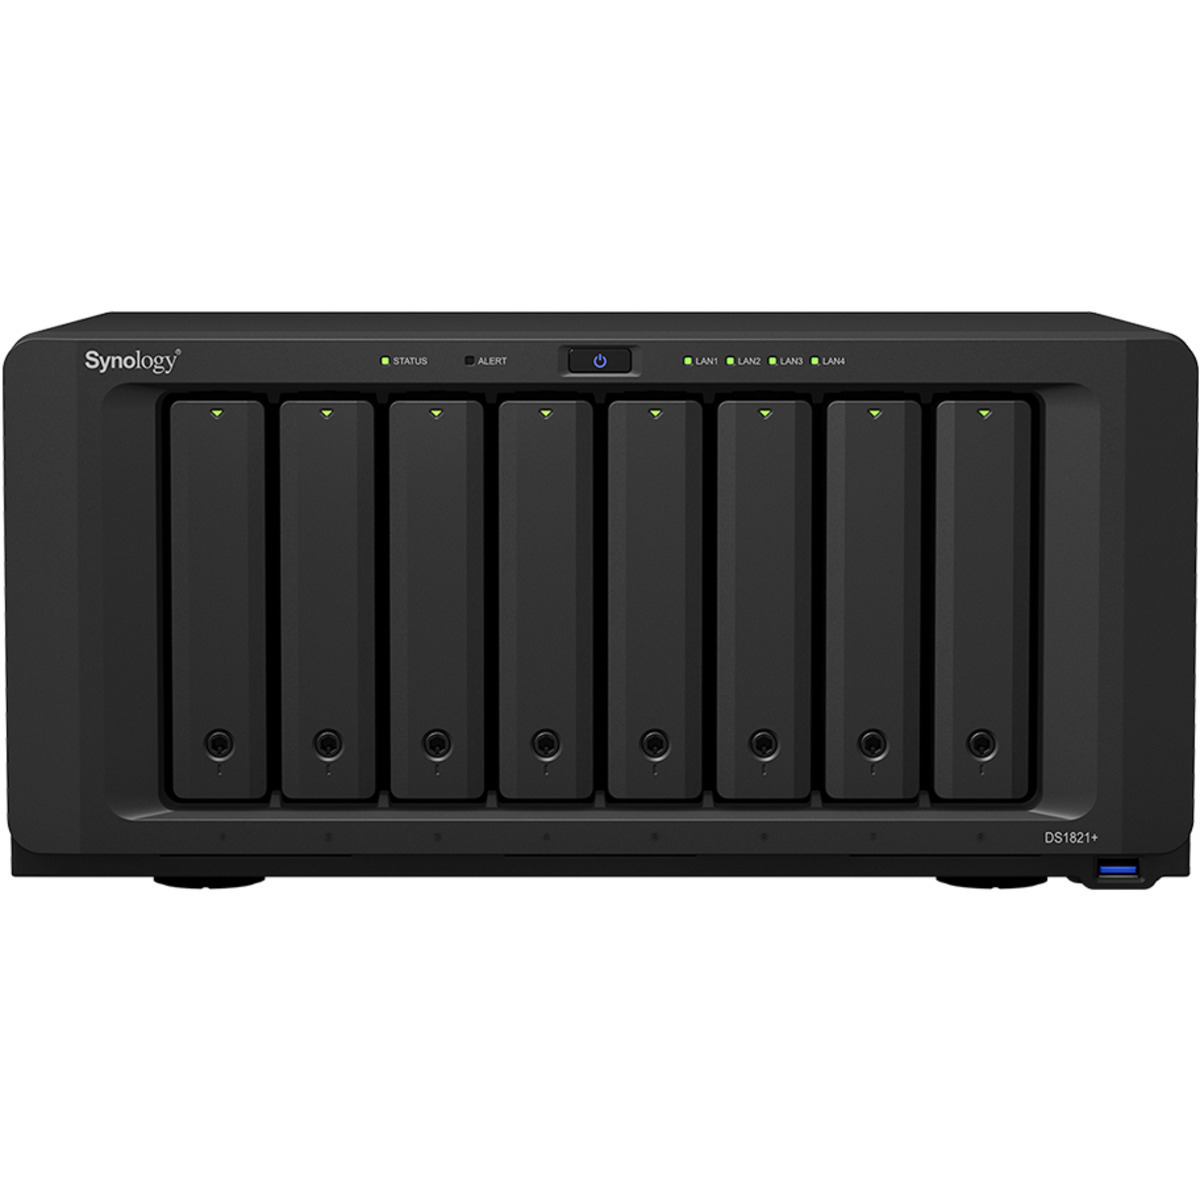 Synology DiskStation DS1821+ 64tb 8-Bay Desktop Multimedia / Power User / Business NAS - Network Attached Storage Device 8x8tb Western Digital Red Pro WD8003FFBX 3.5 7200rpm SATA 6Gb/s HDD NAS Class Drives Installed - Burn-In Tested - FREE RAM UPGRADE DiskStation DS1821+